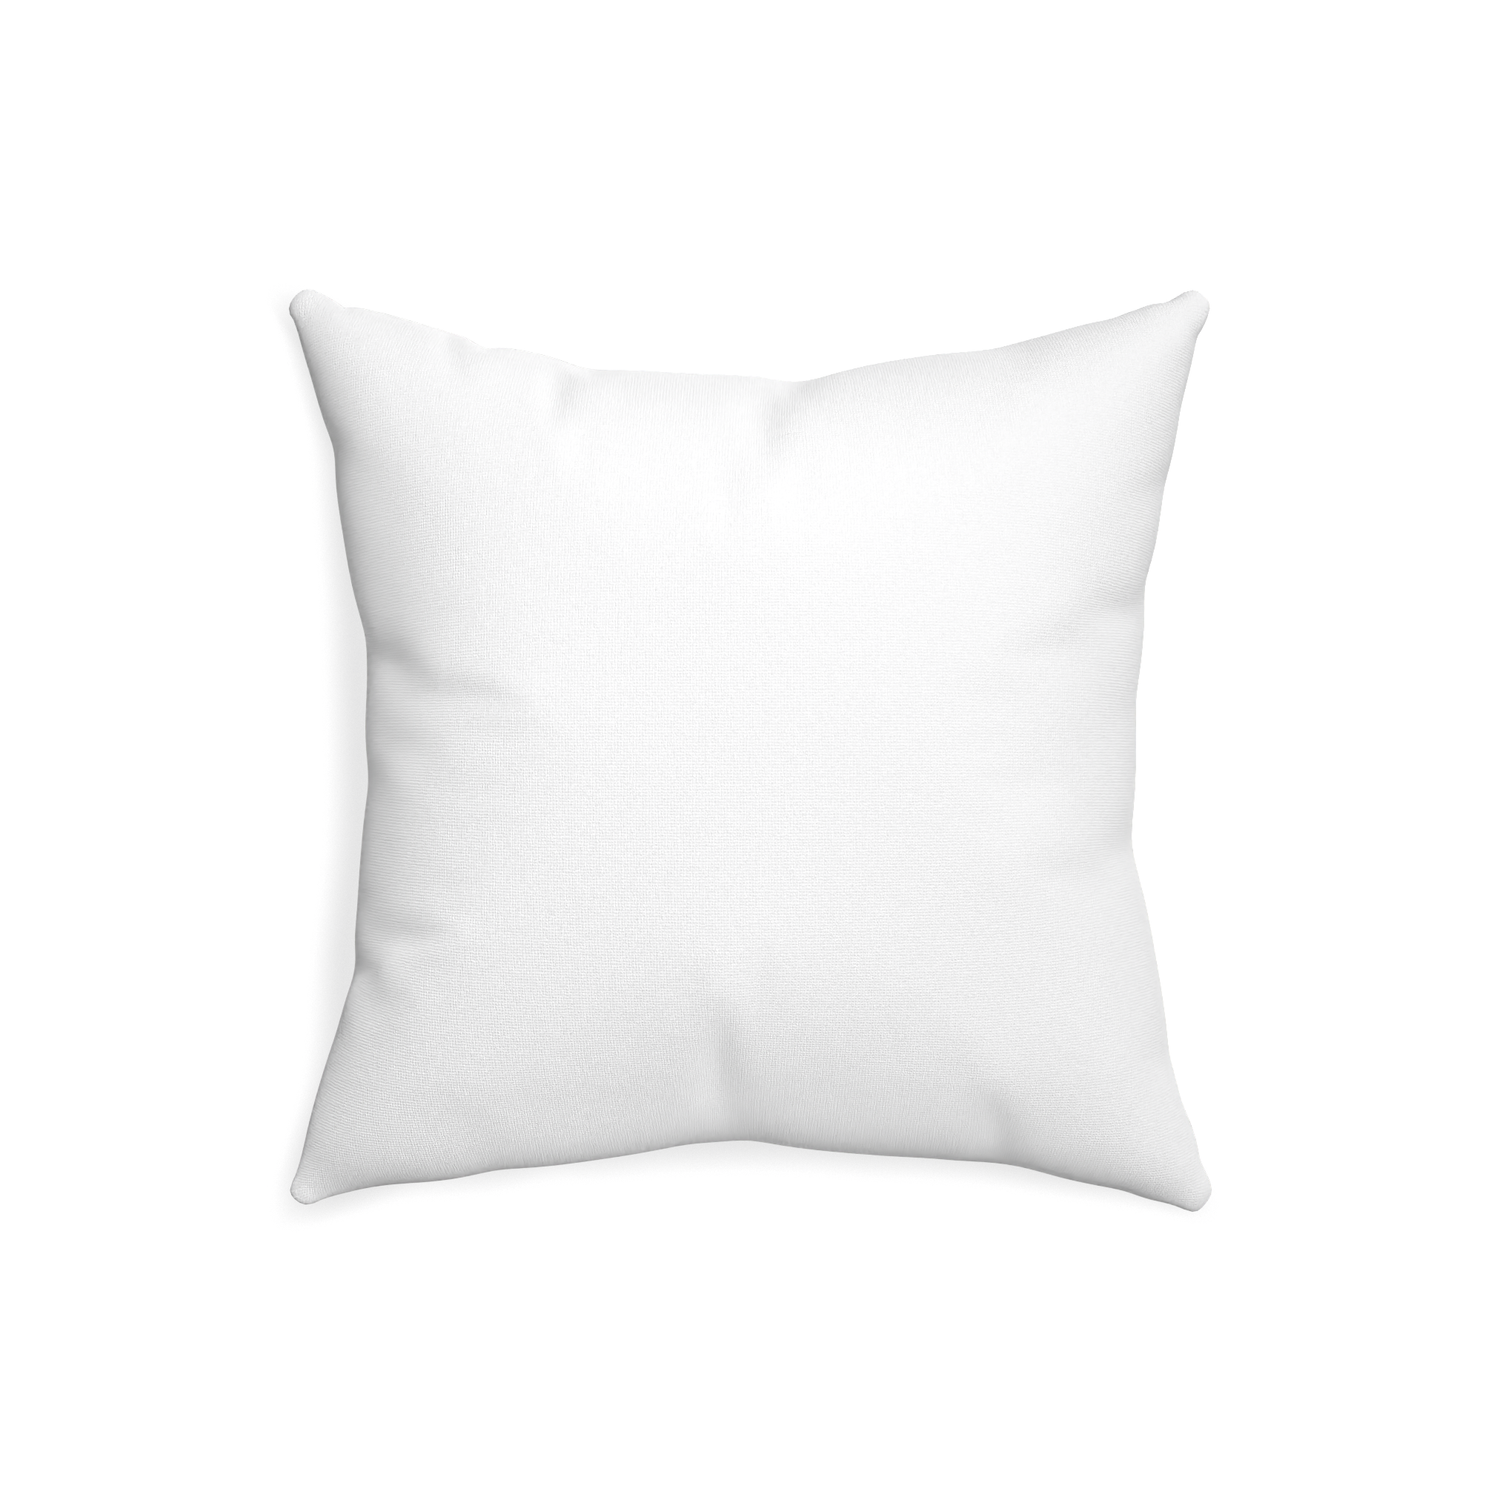 20-square snow custom pillow with none on white background